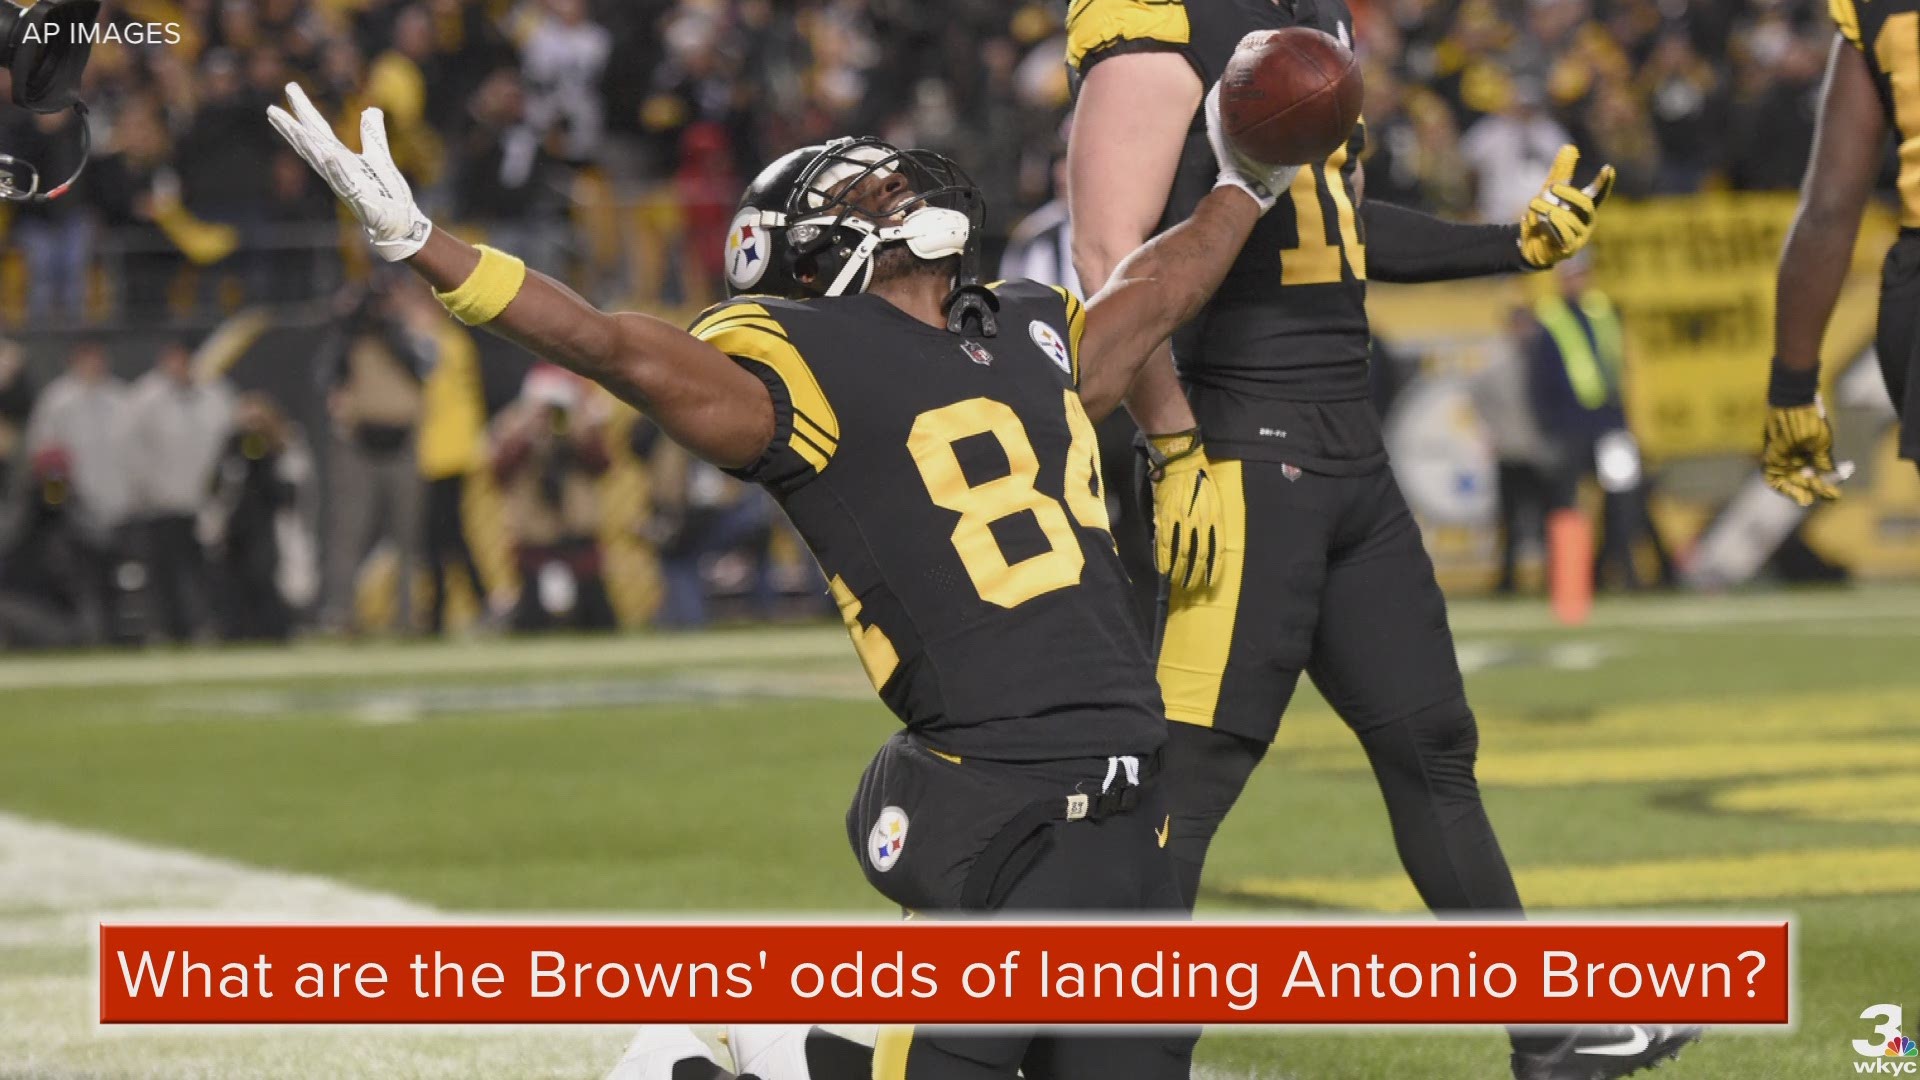 According to BetOnline, the Cleveland Browns have the fifth-best odds of landing disgruntled Pittsburgh Steelers wide receiver Antonio Brown.